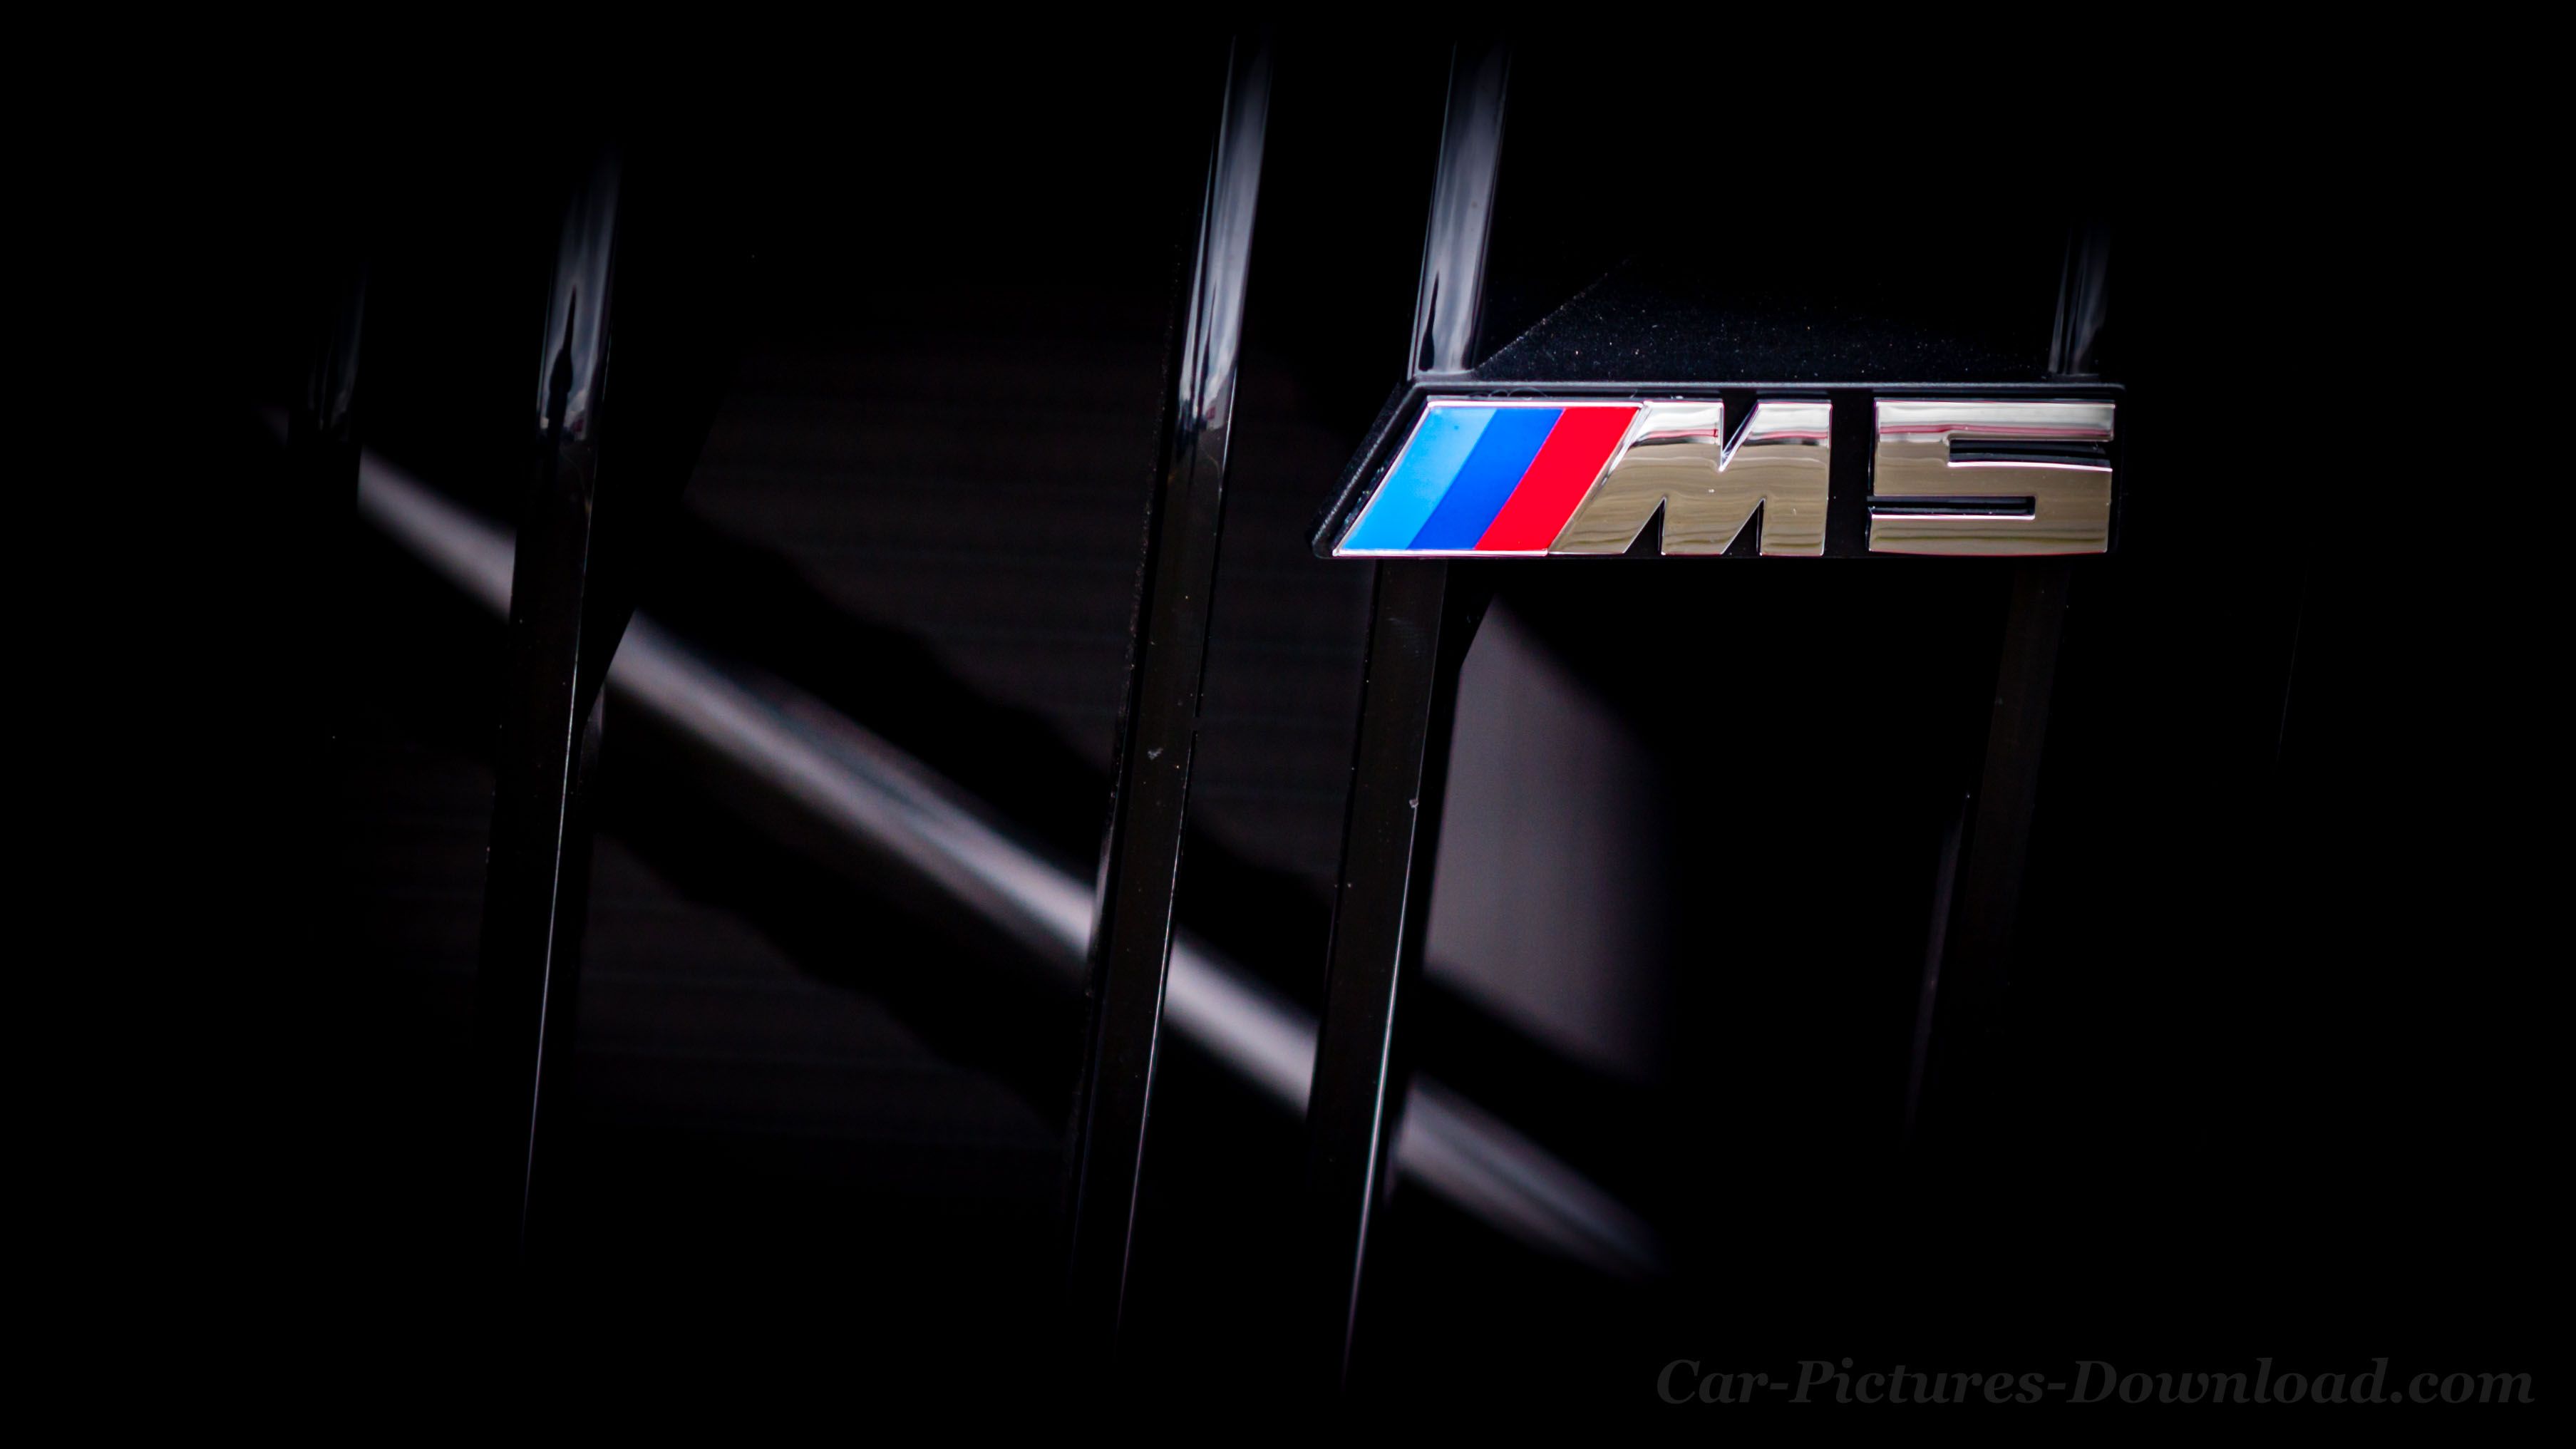 BMW M Wallpaper Picture & Mobile Phones